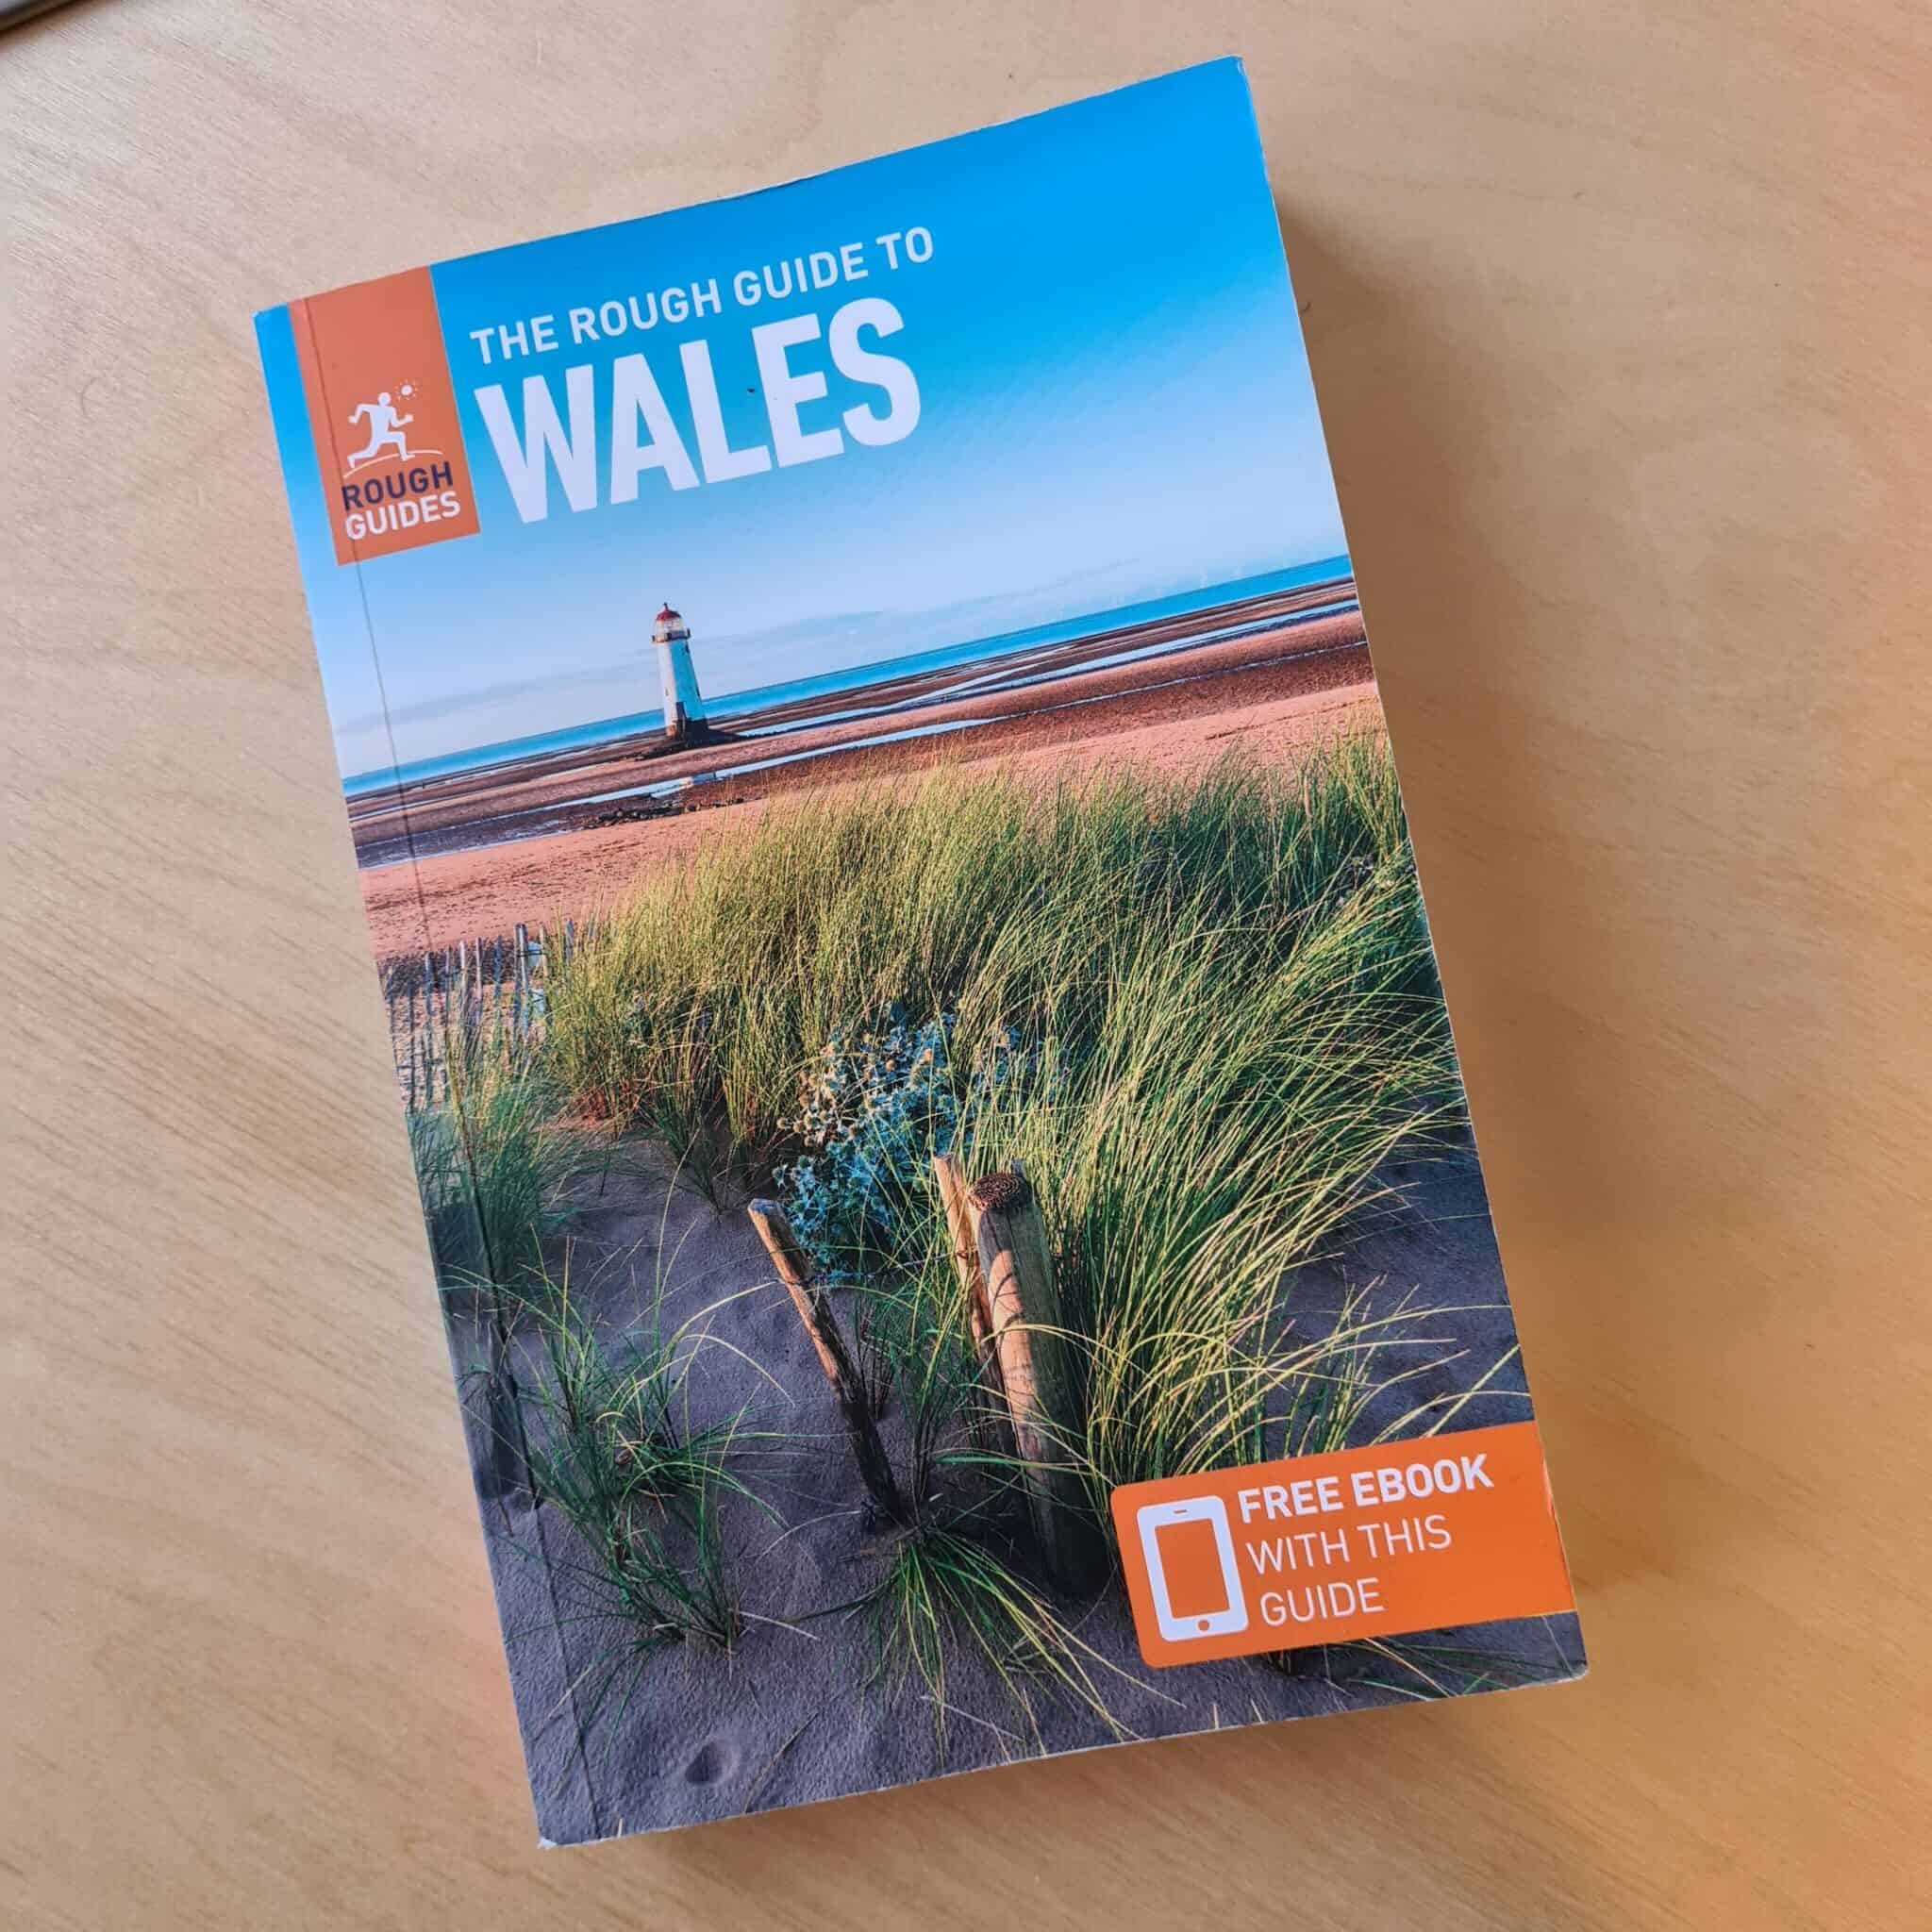 The cover of the book The Rough Guide to Wales